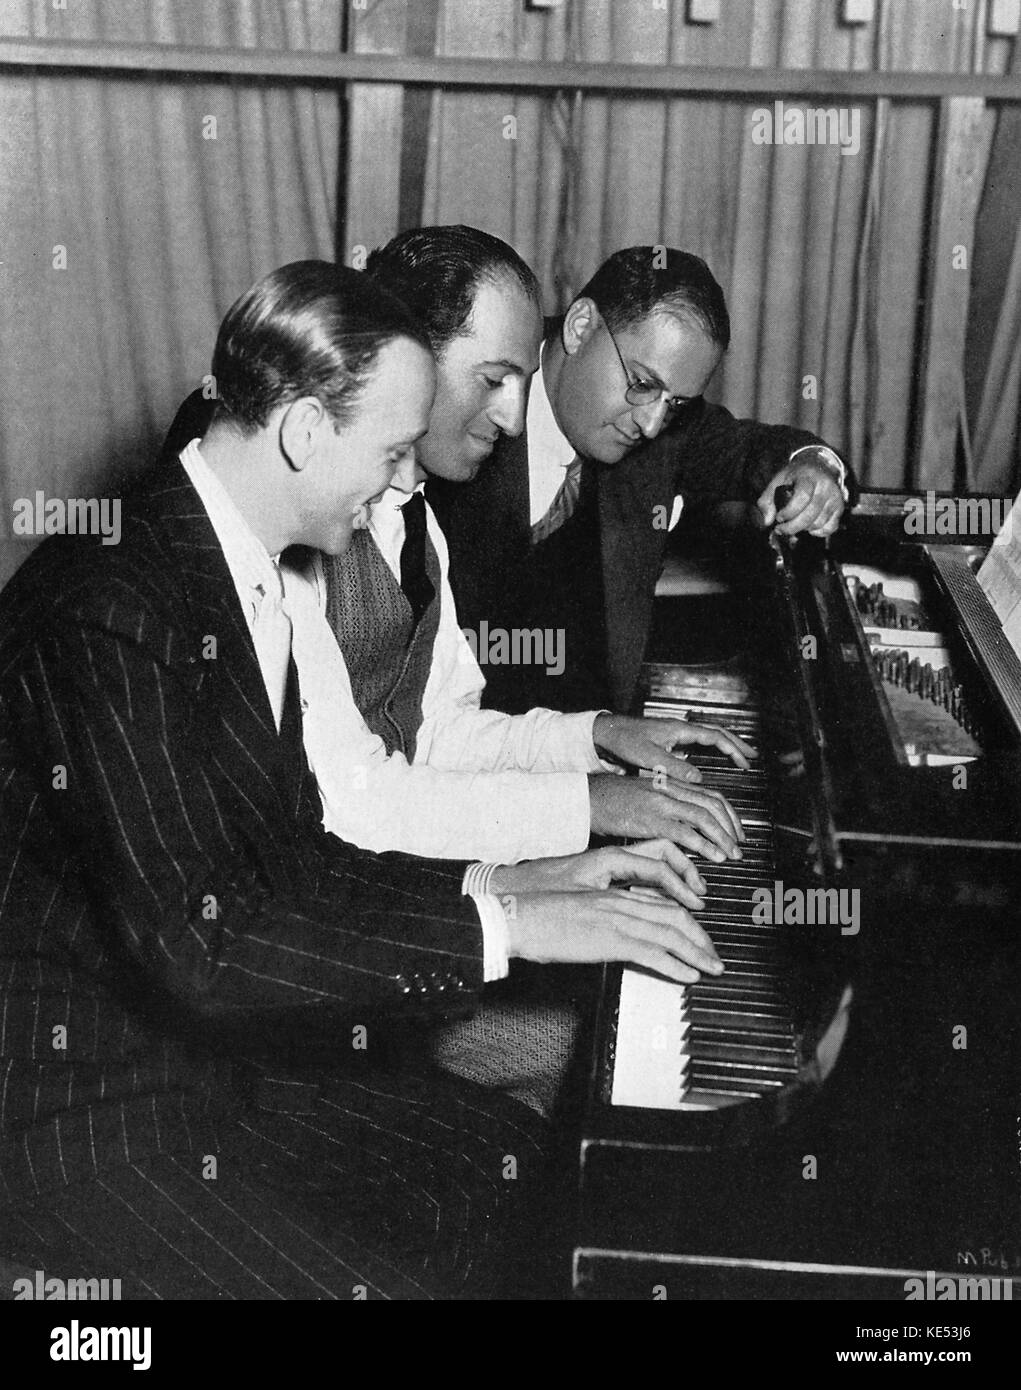 Fred Astaire. George and Ira Gershwin in rehearlalfor 'Shall We Dance'.    American composer & pianist, 26th September 1898 - 11th July 1937 Stock Photo